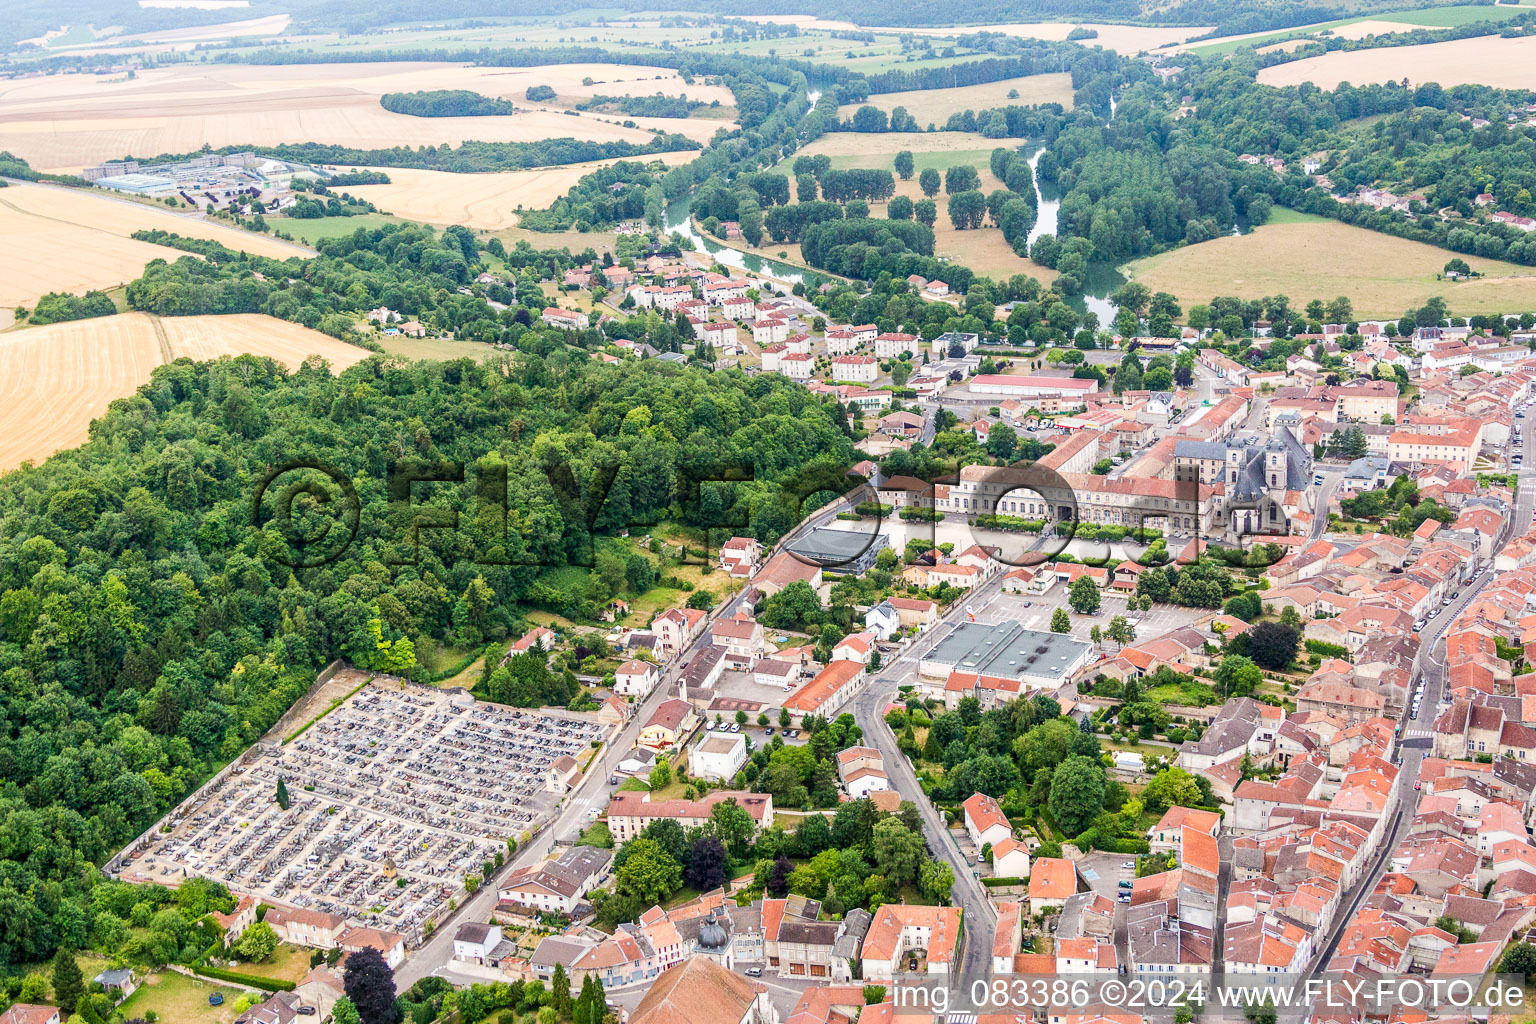 Aerial view of Town on the banks of the river of Maas/Meuse in Saint-Mihiel in Grand Est, France